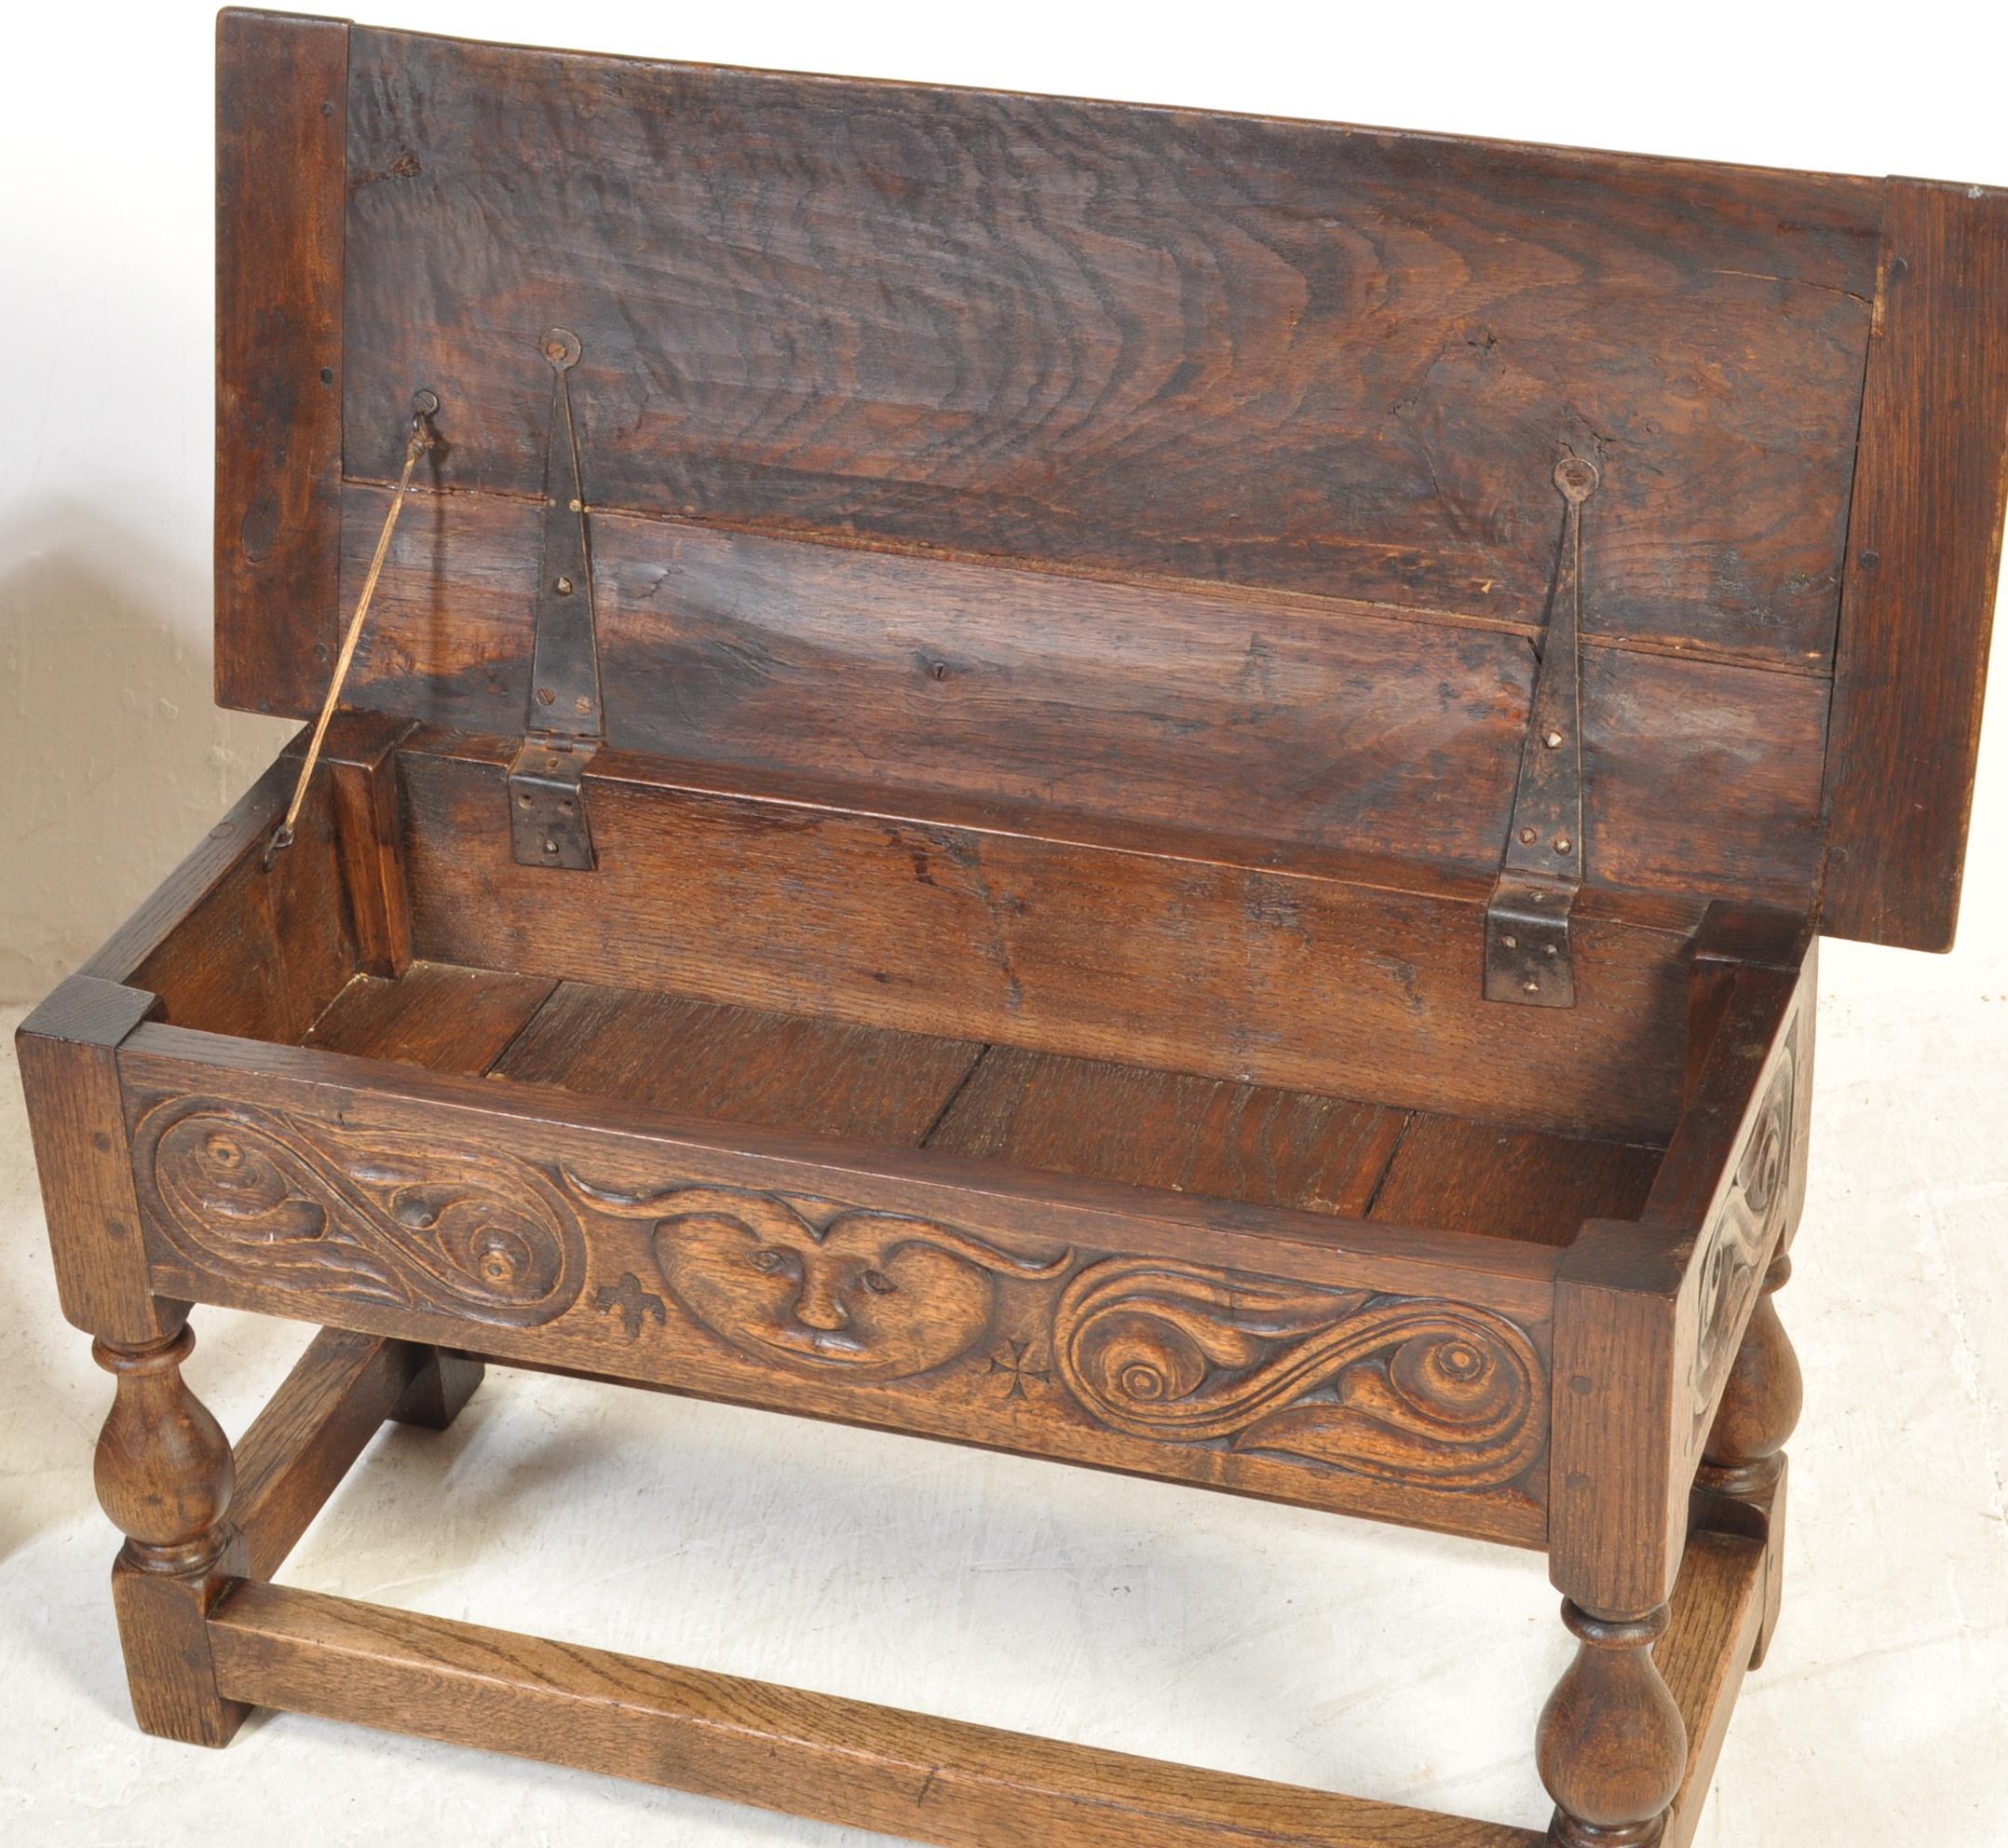 17TH CENTURY STYLE COFFER / BIBLE BOX ON STAND TOGETHER WITH A NEST OF TABLES - Image 6 of 6